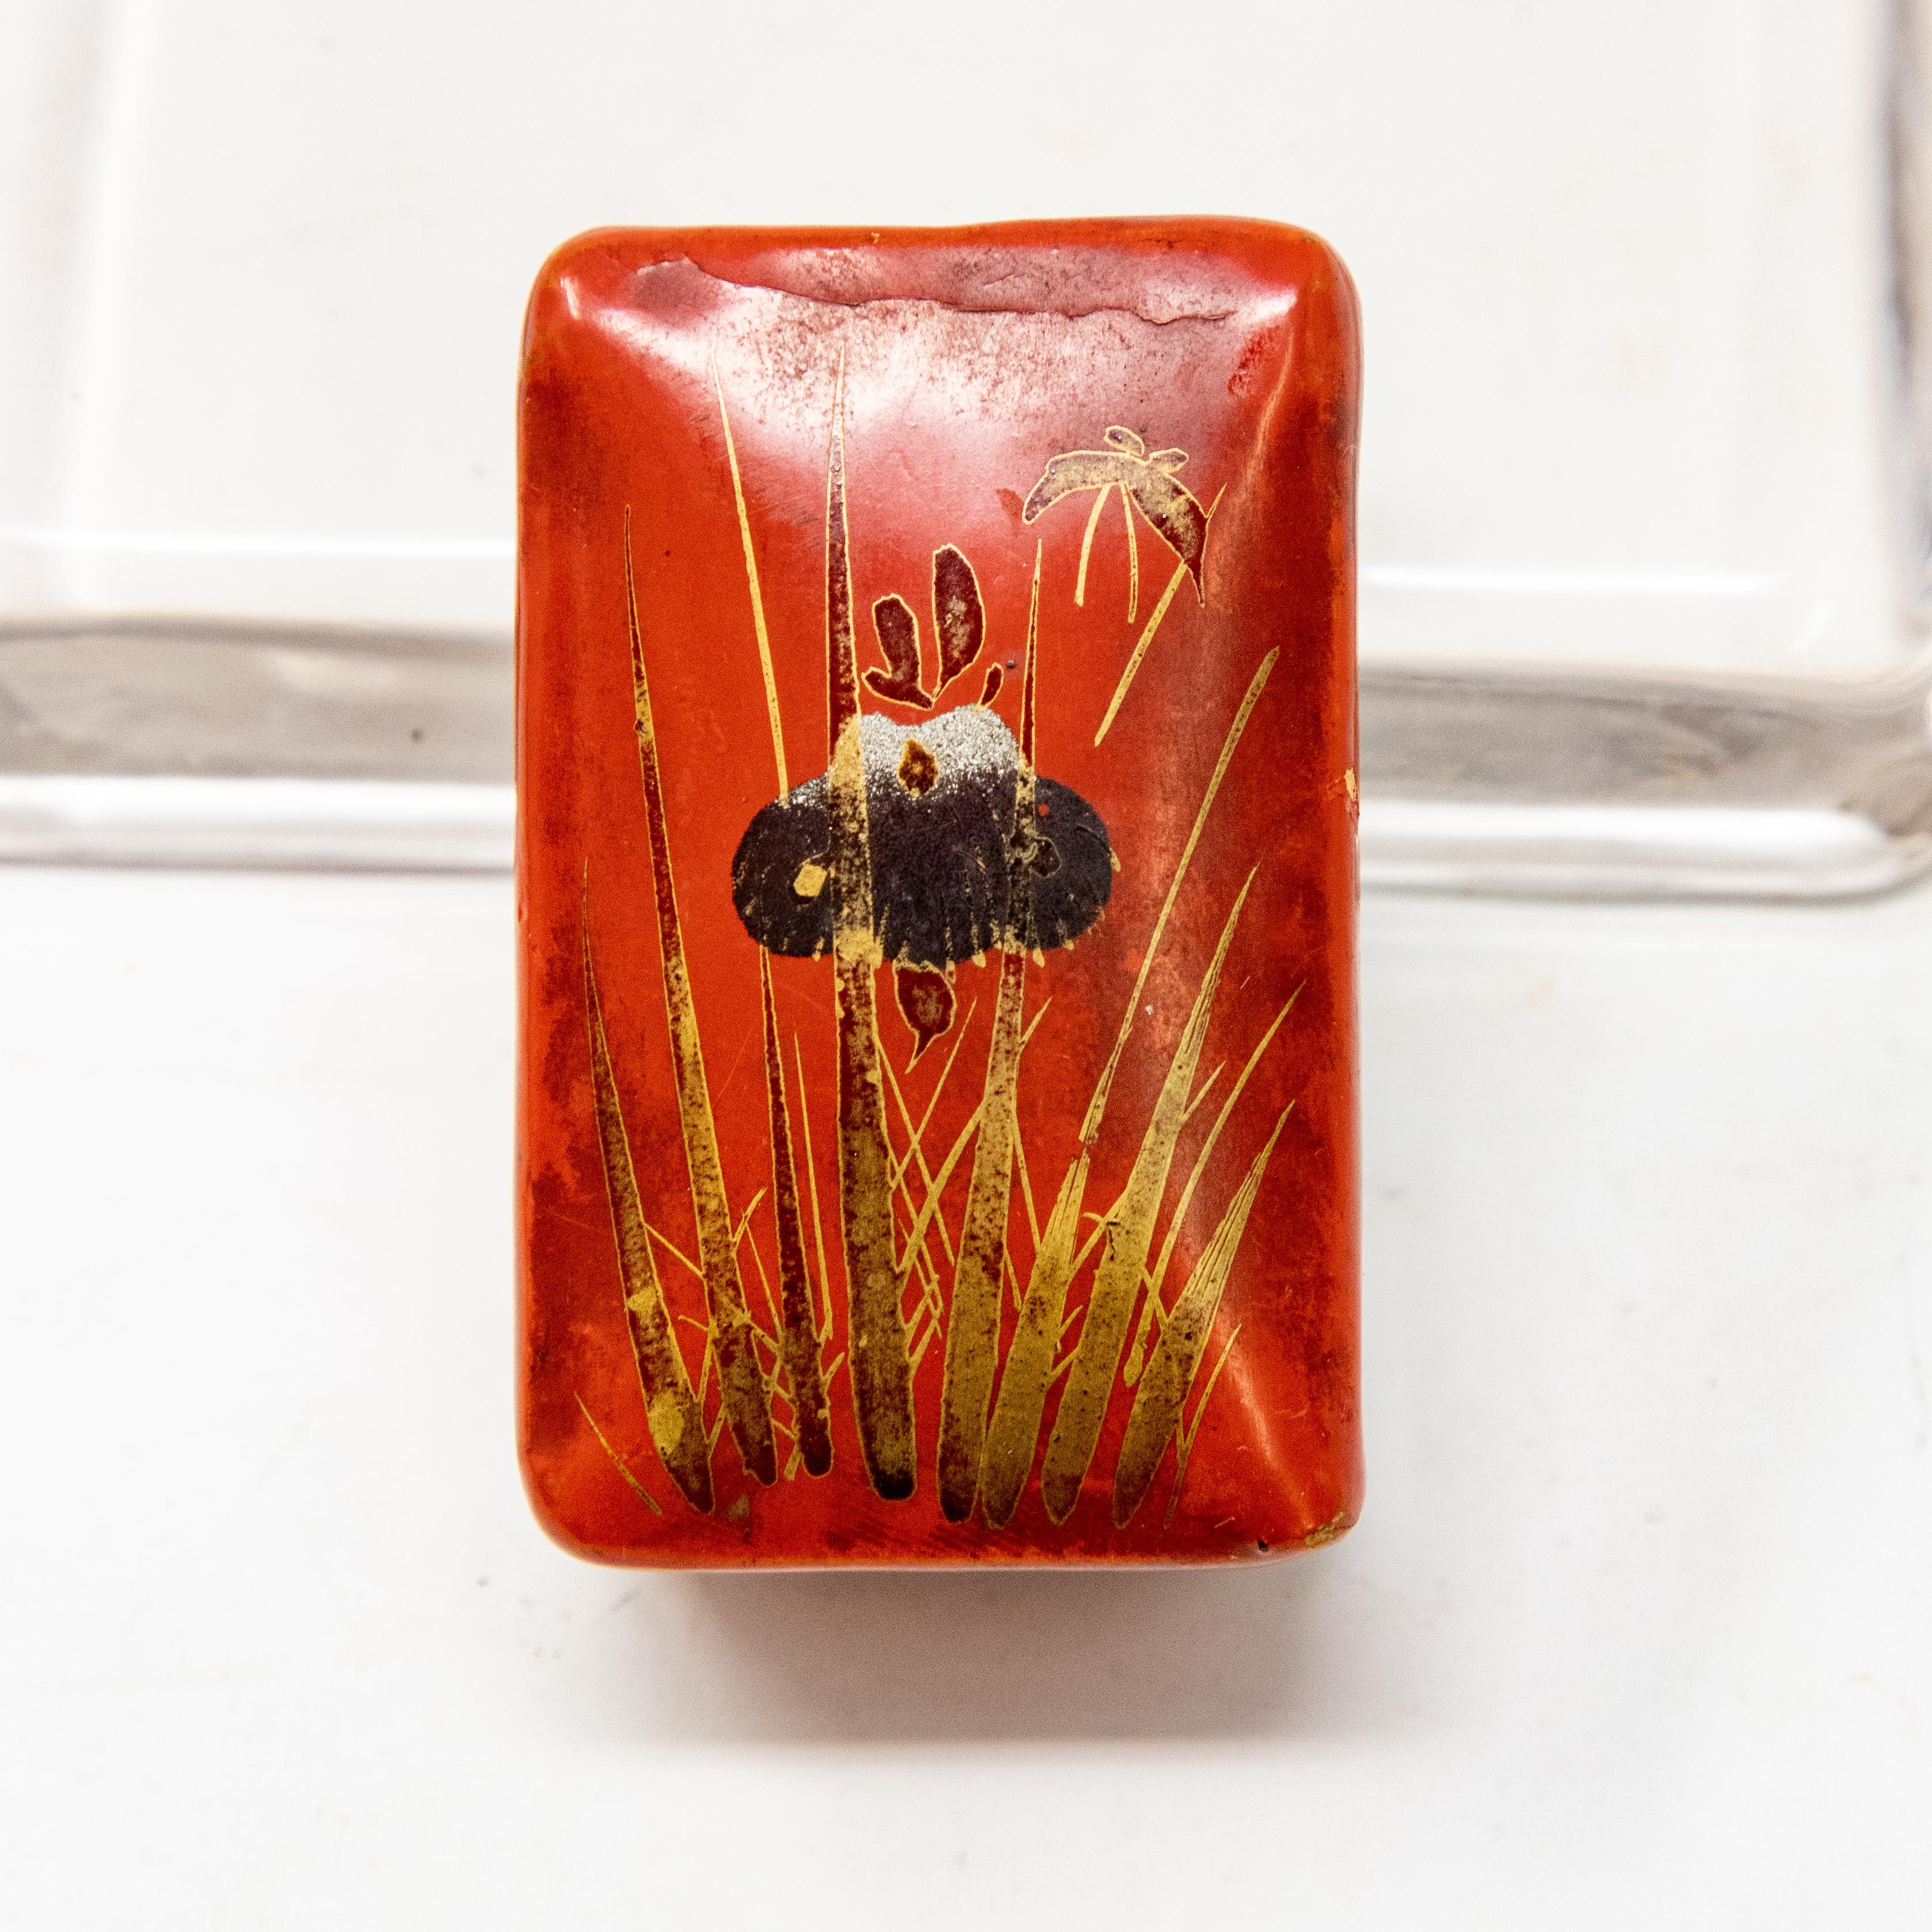 Offering this stunning red lacquered papier mâché pillbox. The bottom and inside of the box are black lacquer. The front is hand painted and has an orchid with other foliate designs.